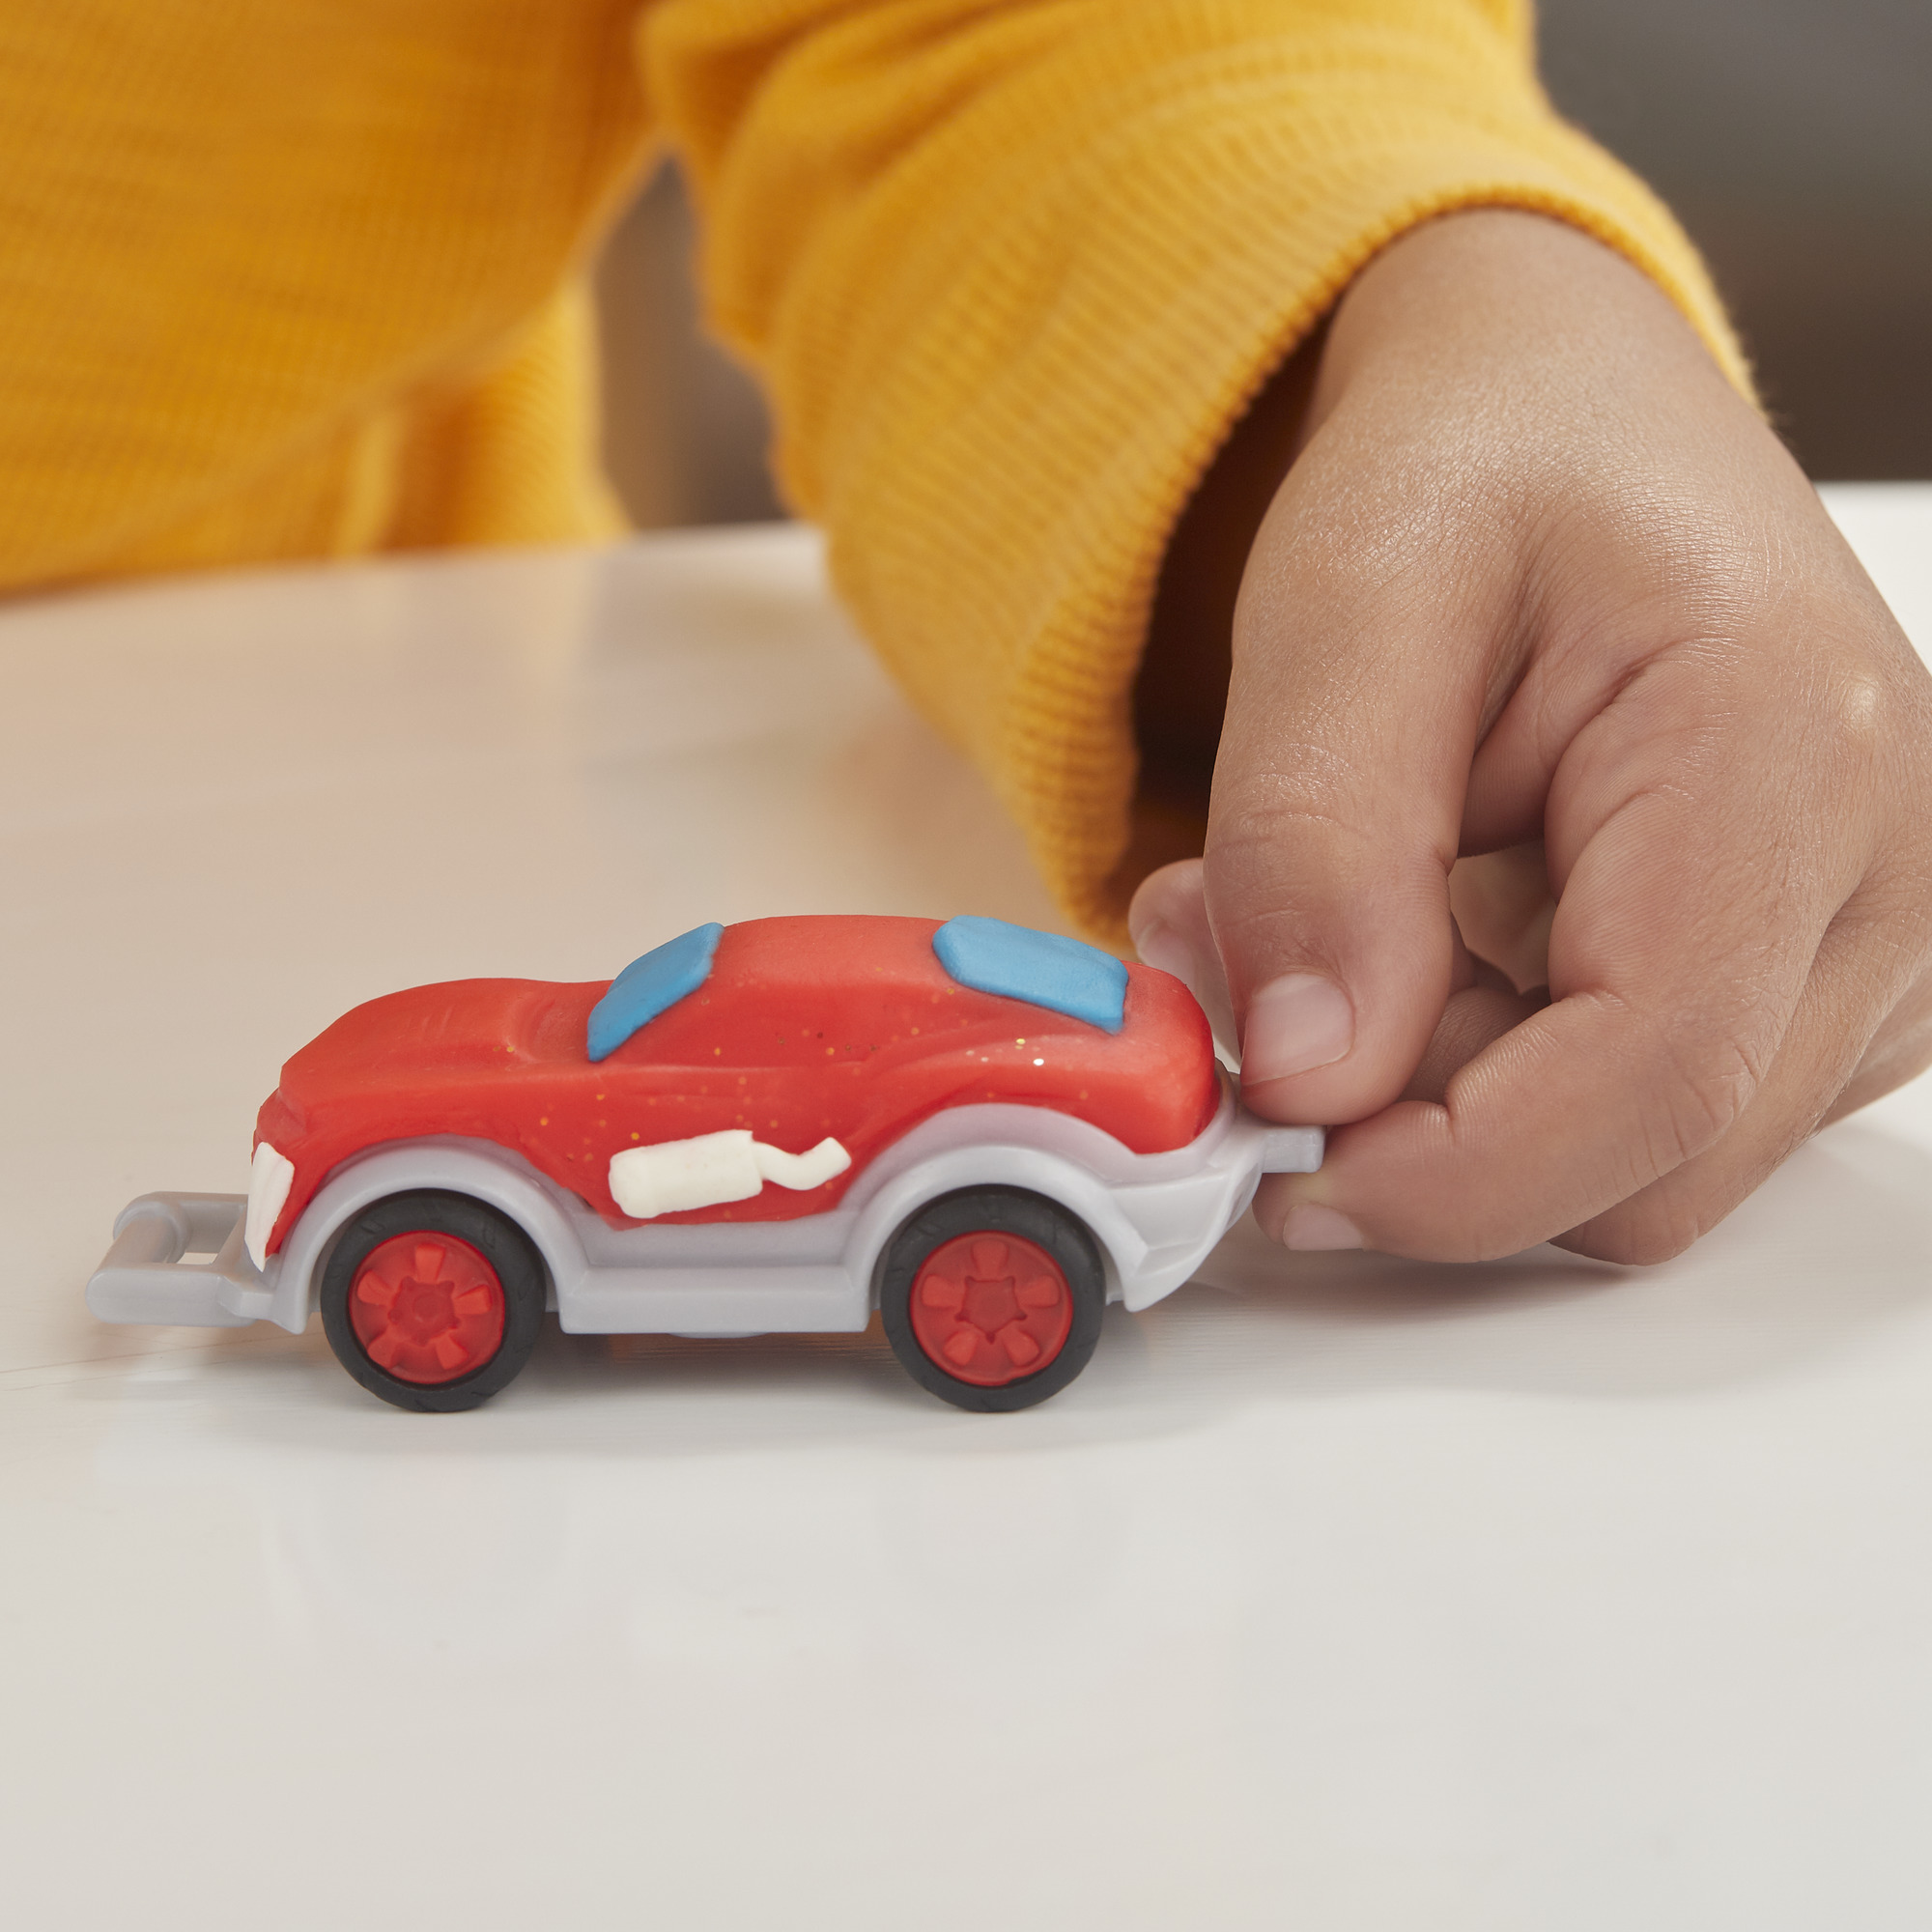 Play-Doh Wheels Tow Truck Toy with 3 Non-Toxic Play-Doh Colors, (6 oz) - image 13 of 14